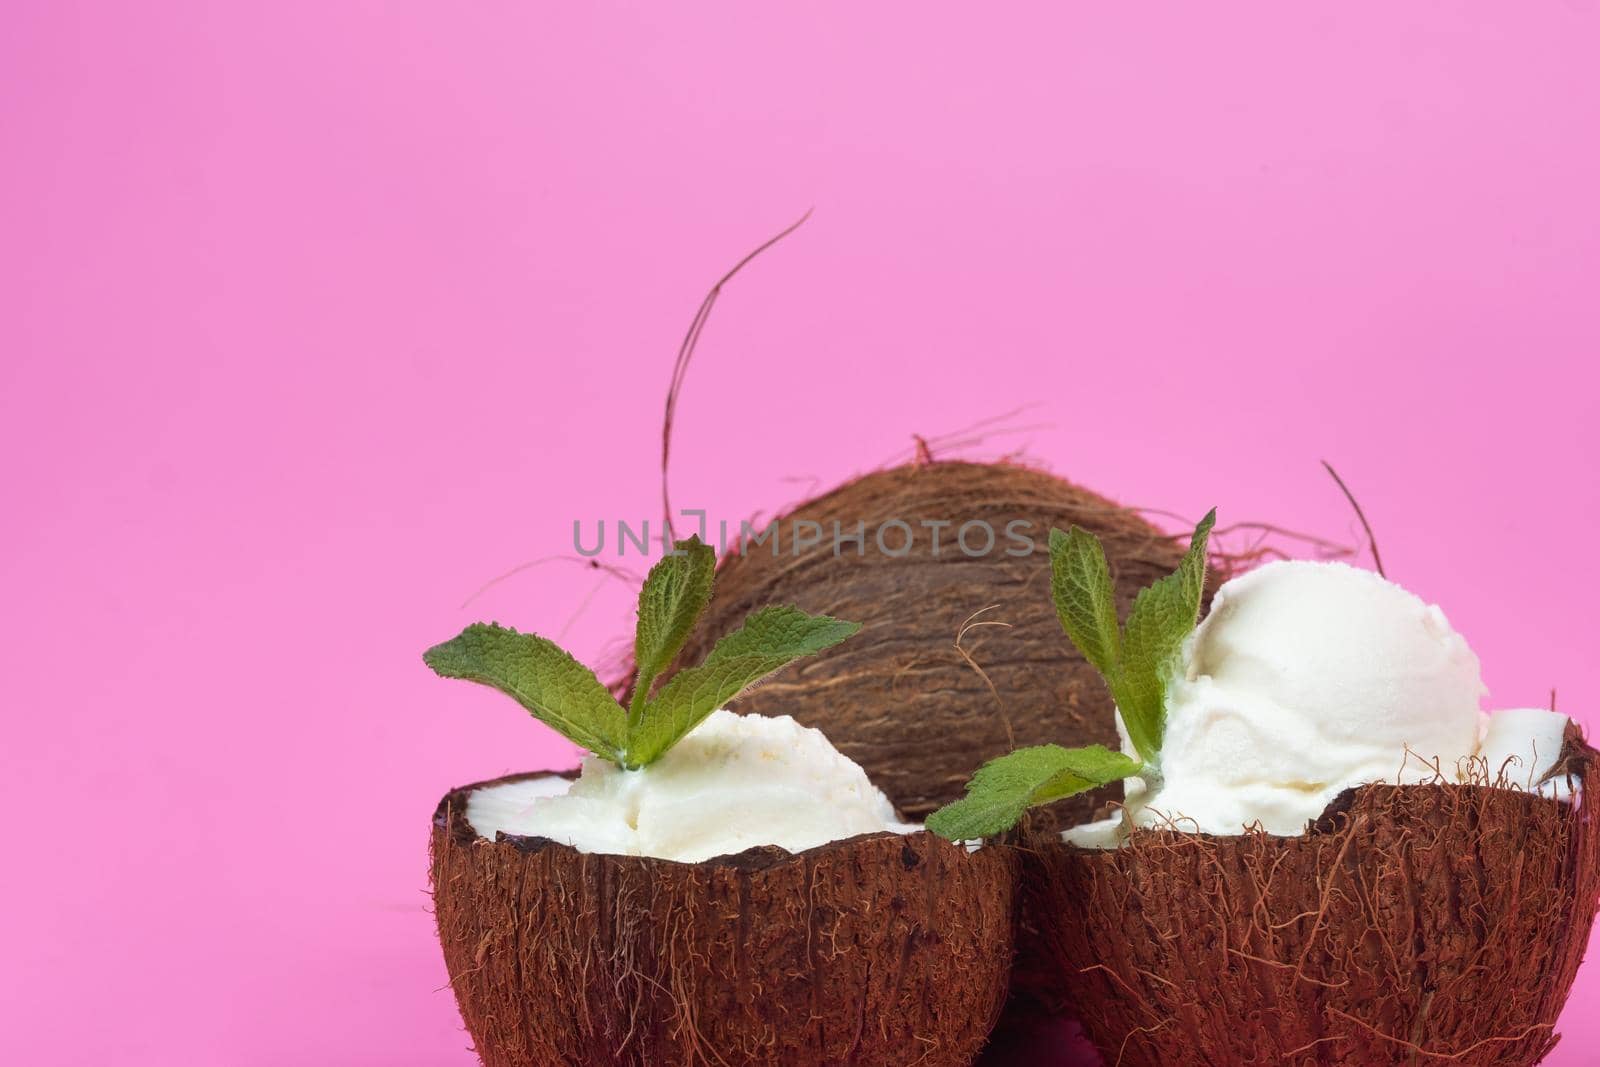 Vanilla ice cream balls in fresh coconut halves decorated with mint leaves on a pink background.